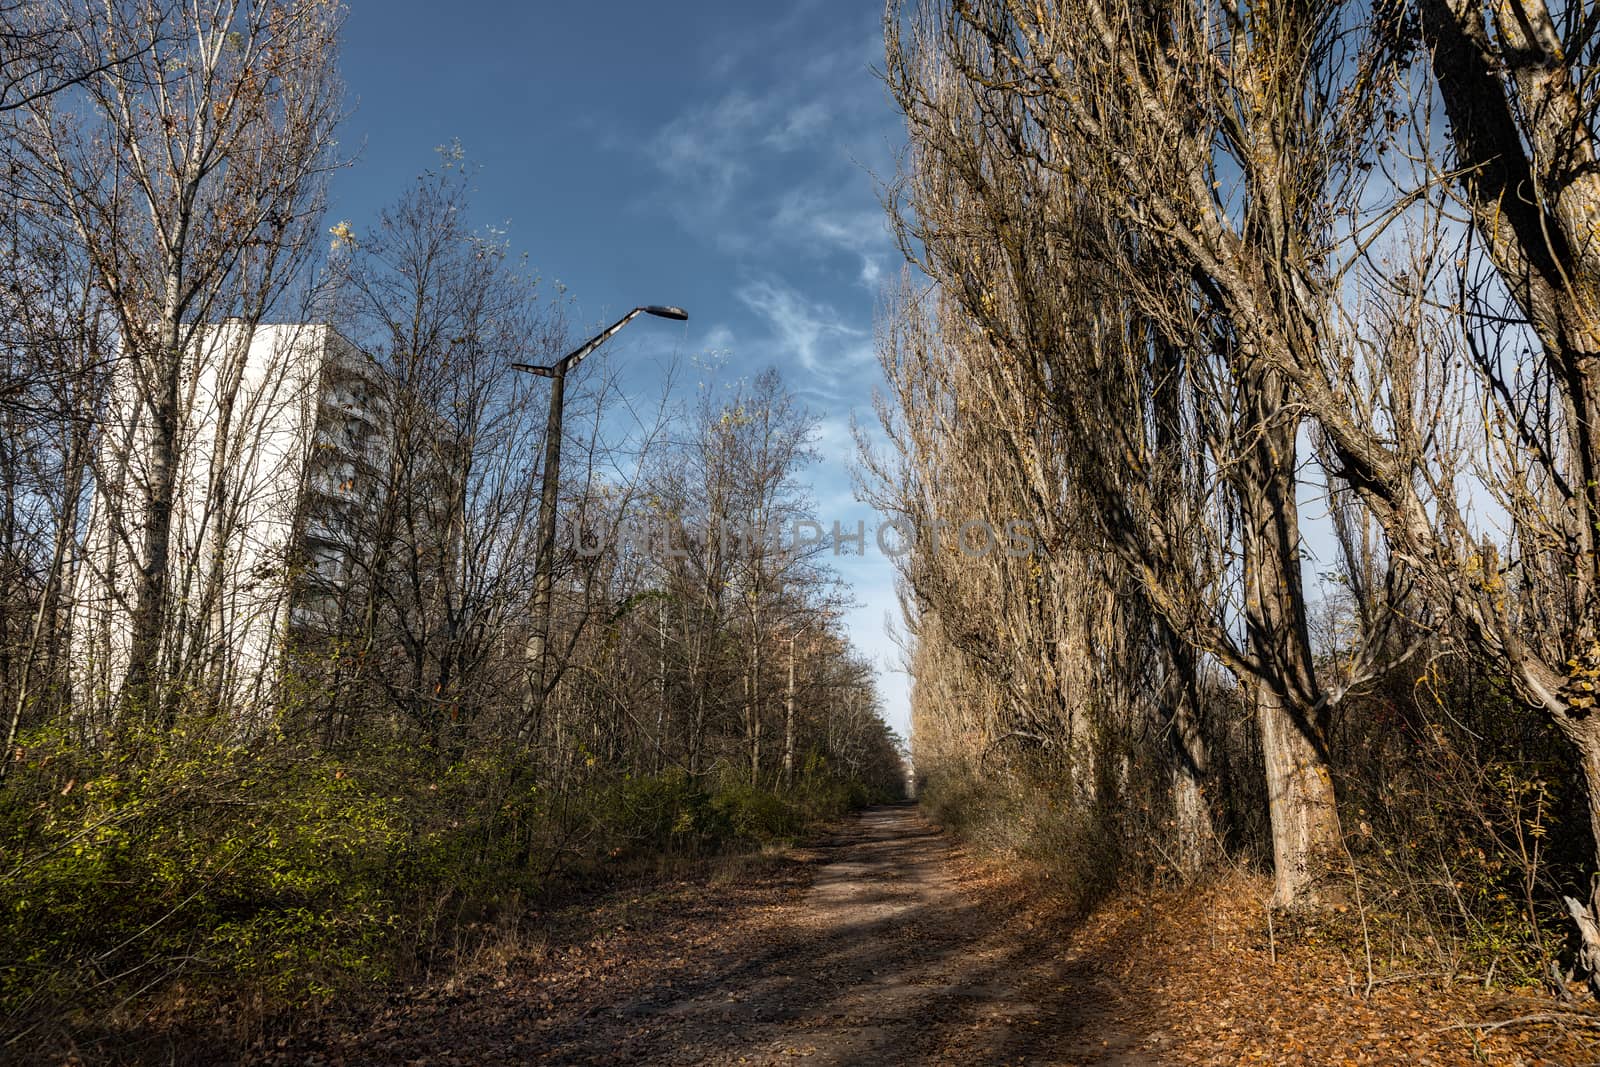 Forest reclaiming the Zone, in Chernobyl, Pripyat